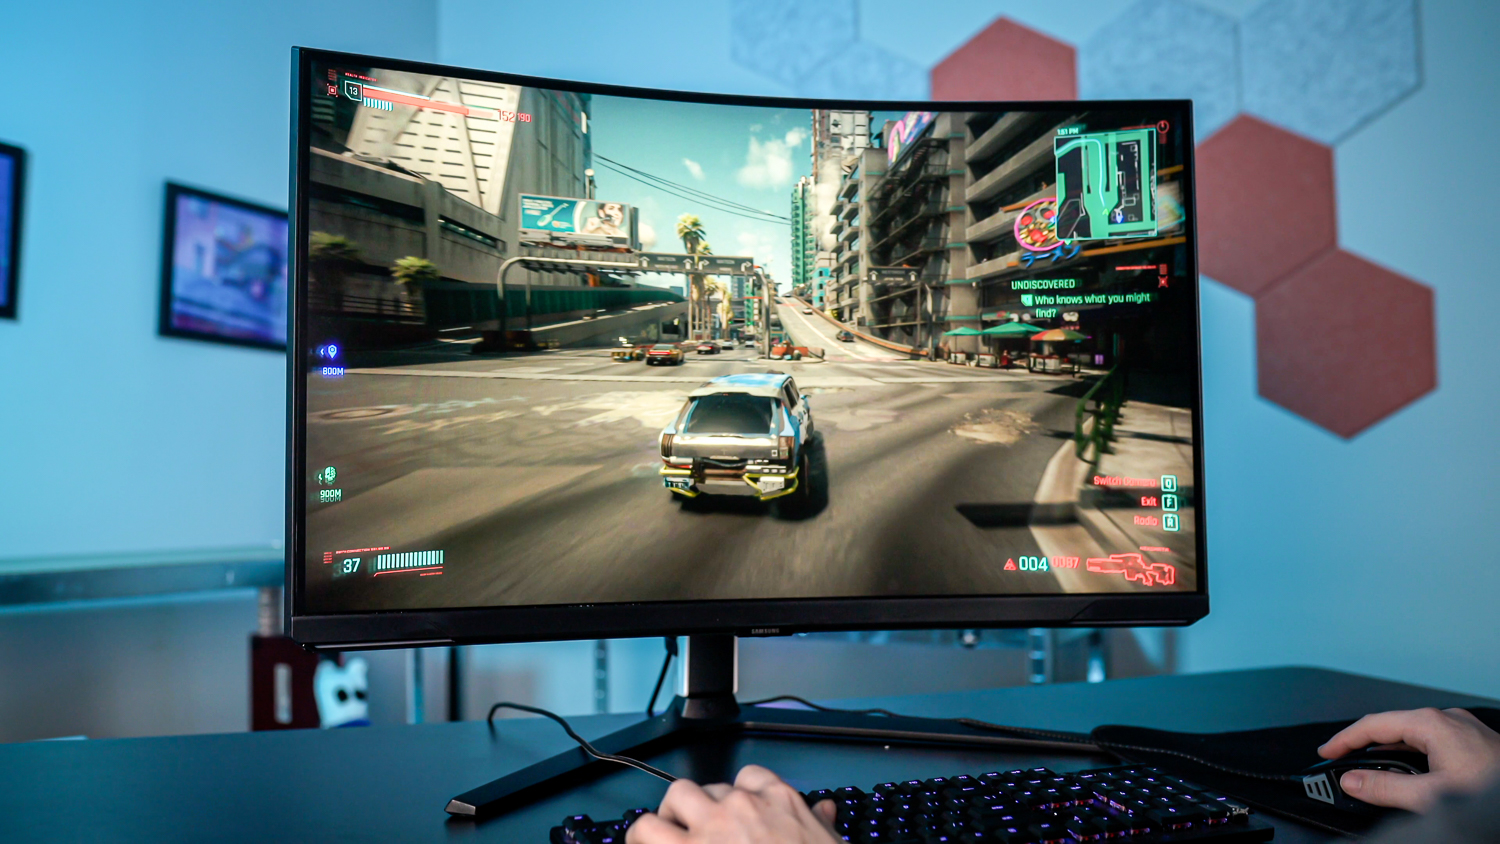 Samsung Odyssey Neo G8 32 240 Hz 4K Gaming Monitor Review: Power & Beauty 